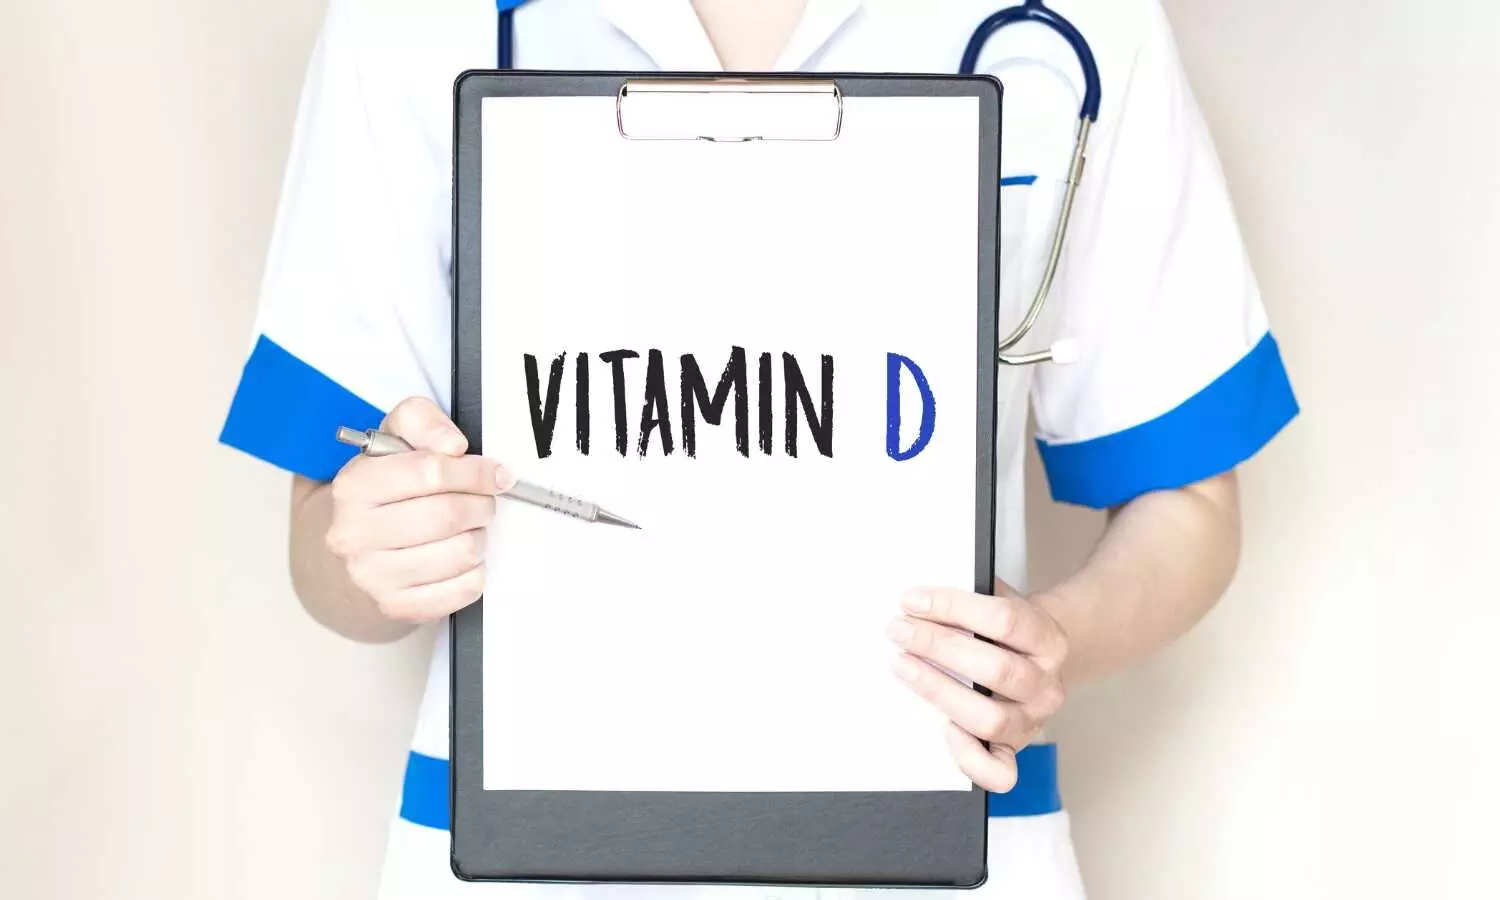 Can vitamin D arrest daily physical activity decline in low-functioning adults at risk for falls?